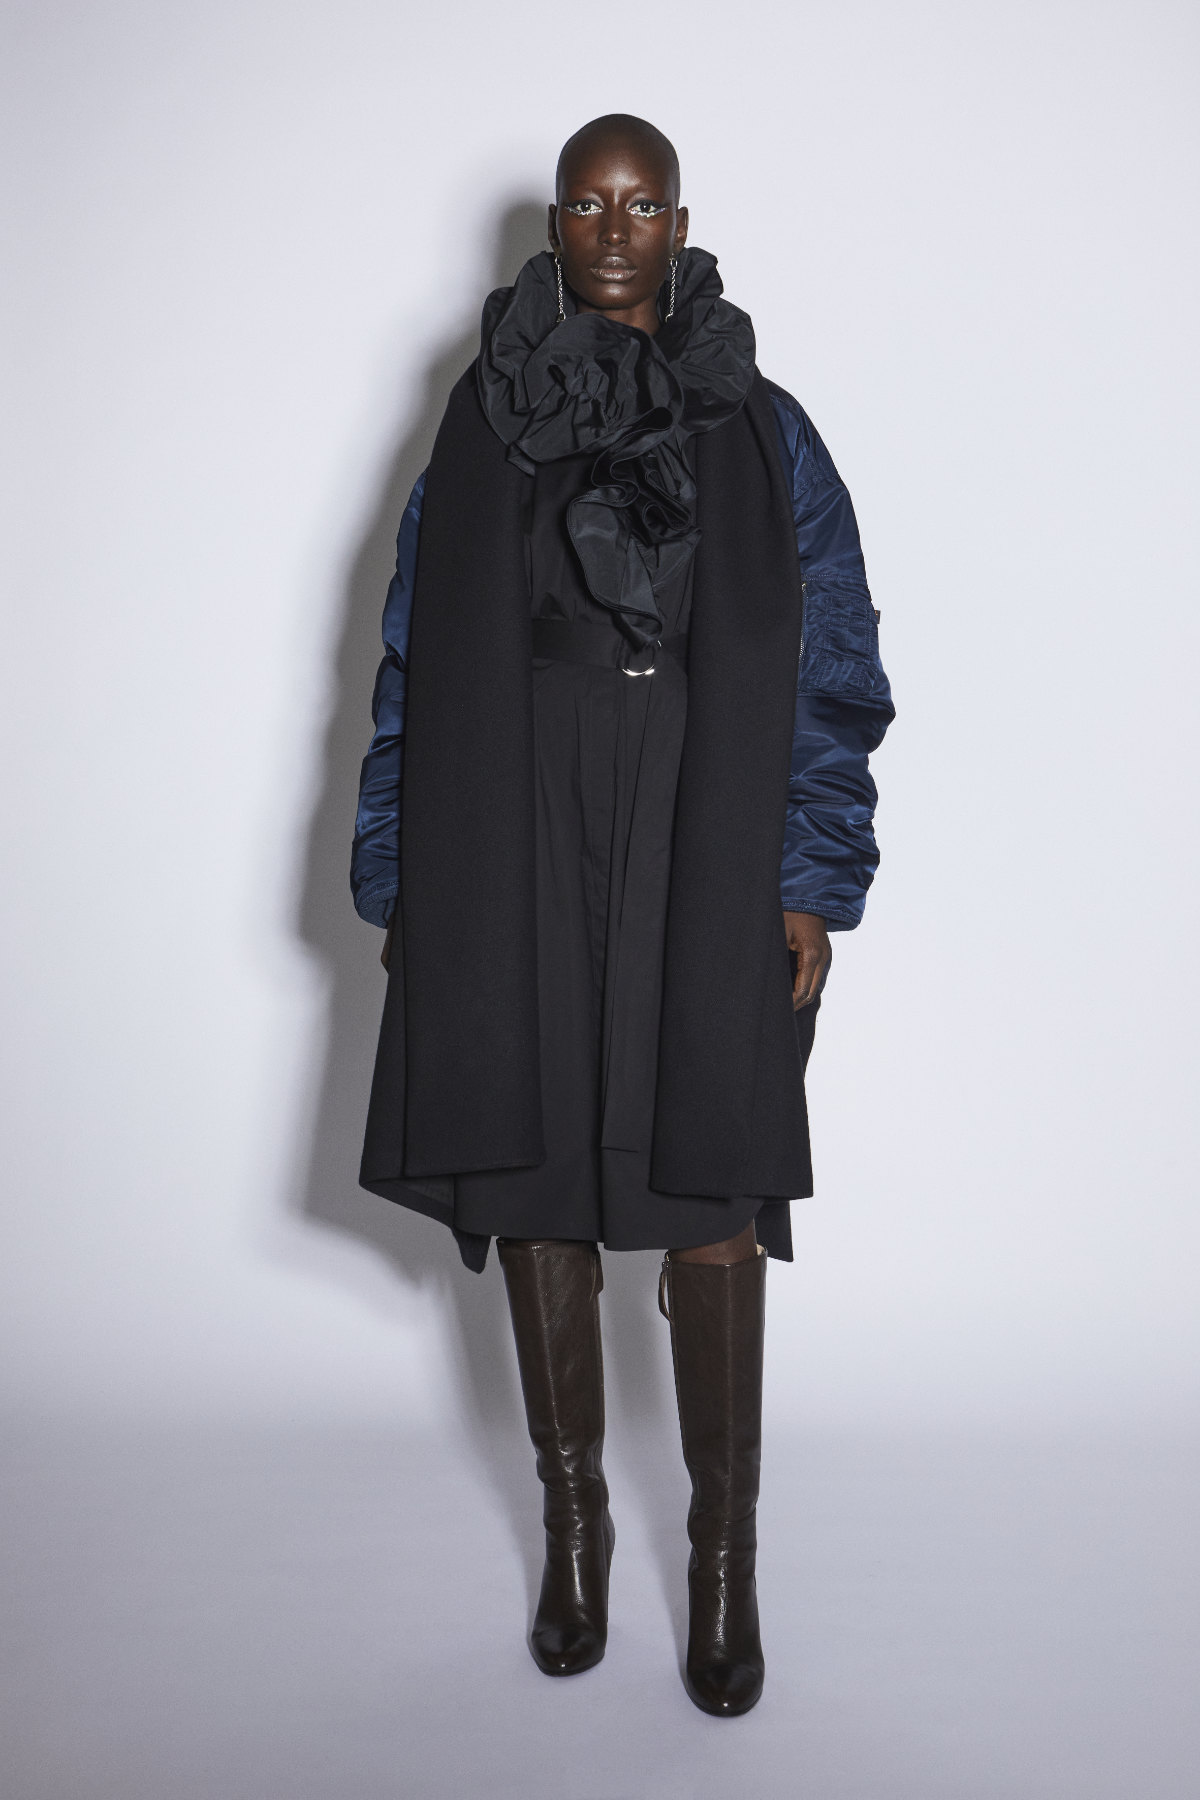 Lutz Huelle Presents Its New Autumn Winter 2022 Collection